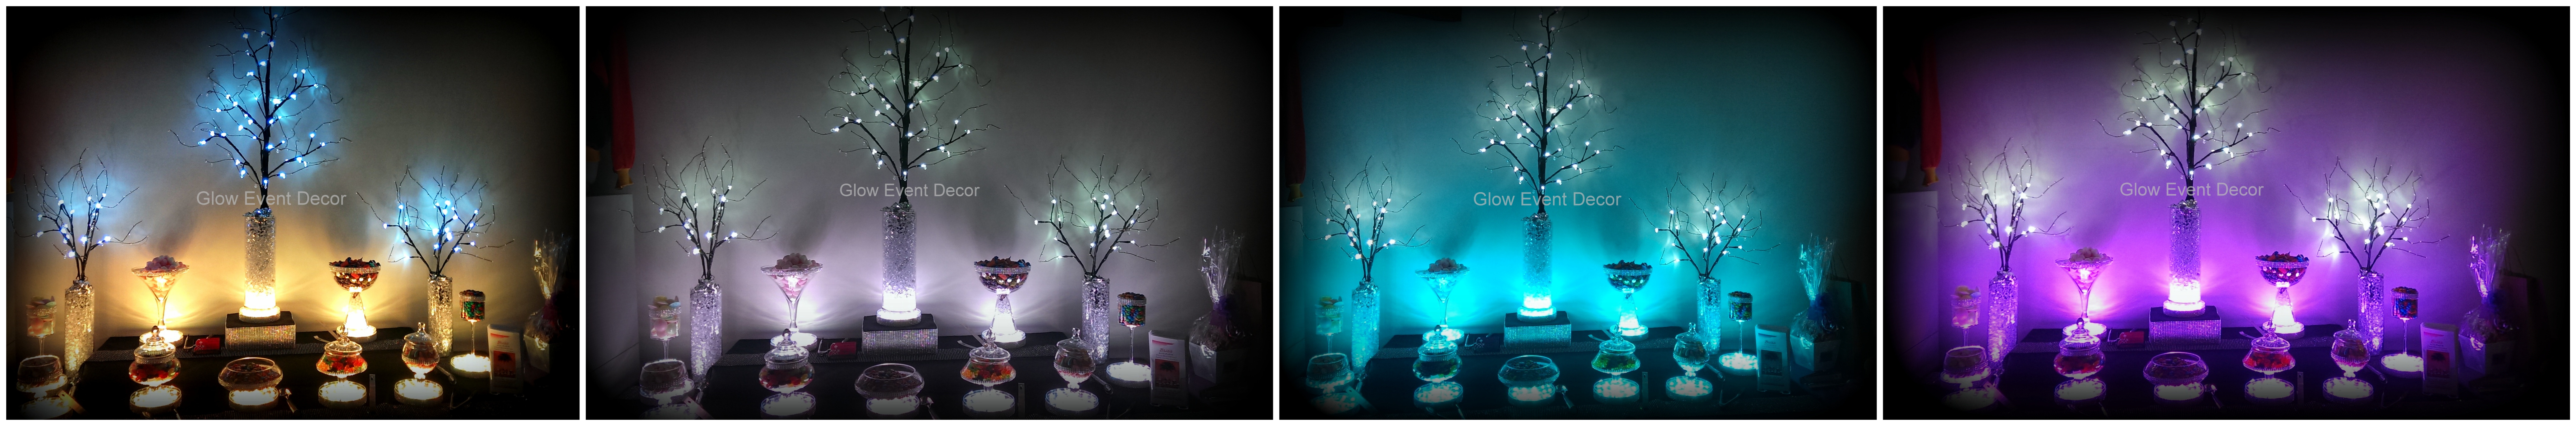 double height LED branches table centrepiece decorations with LED light base and crystal ice, with lolly candy buffet for hire adelaide